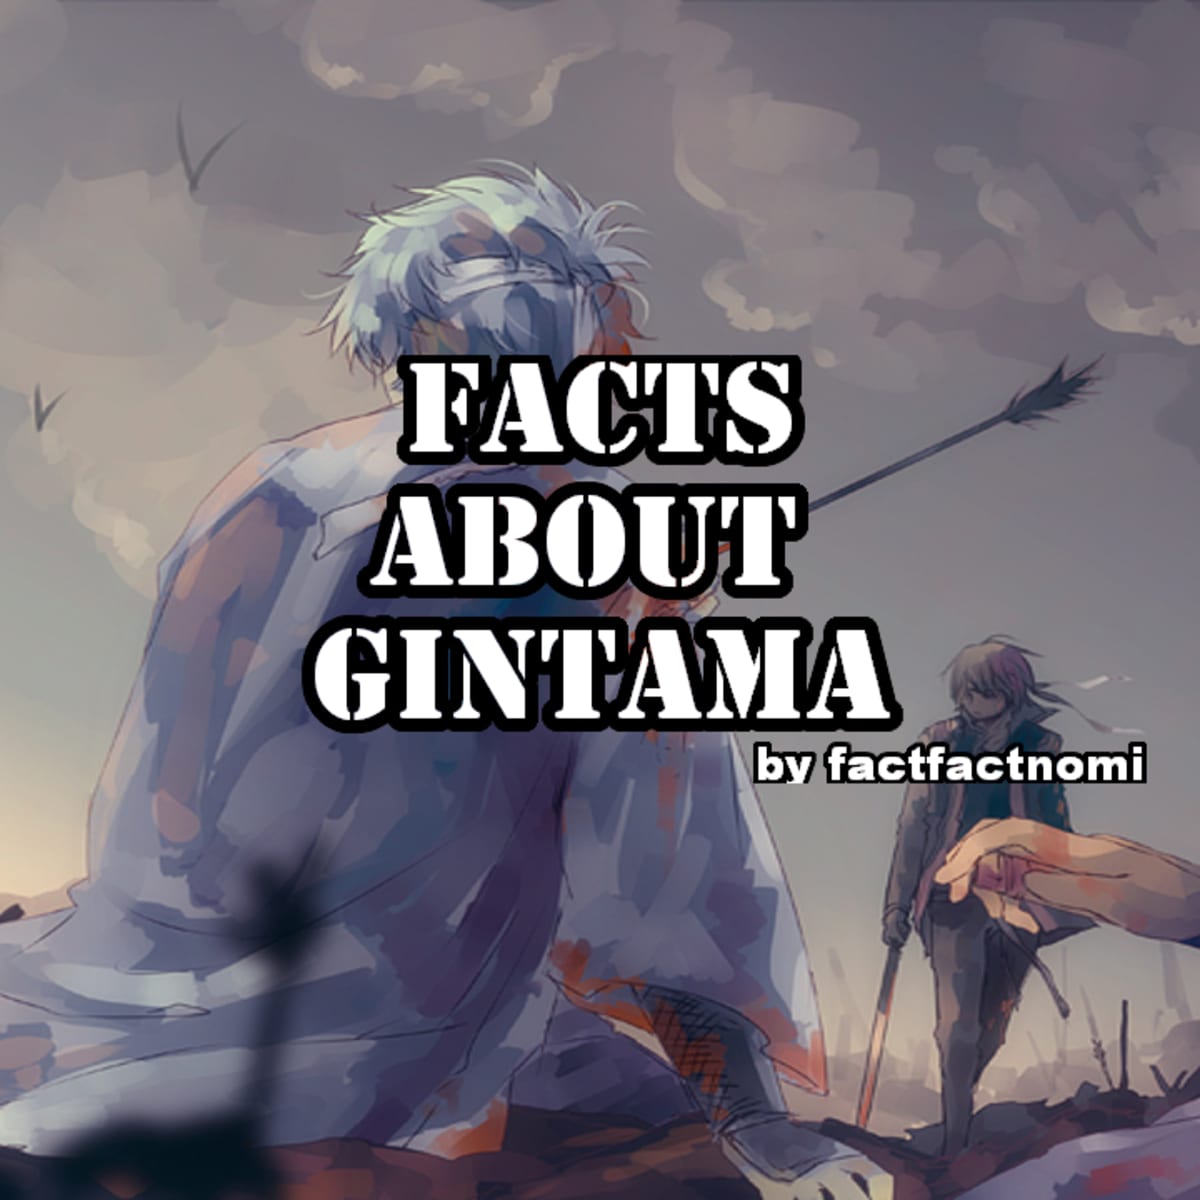 Anime Facts 101 - Anime Fact 101 (Boku no Hero Academia) ‼️ More anime facts  here: http://animefacts101.blogspot.com/ ‼️ Can't get enough of anime facts?  Visit us here! Instagram: https://www.instagram.com/animefact101/ Tumblr:  https://animefacts101 ...